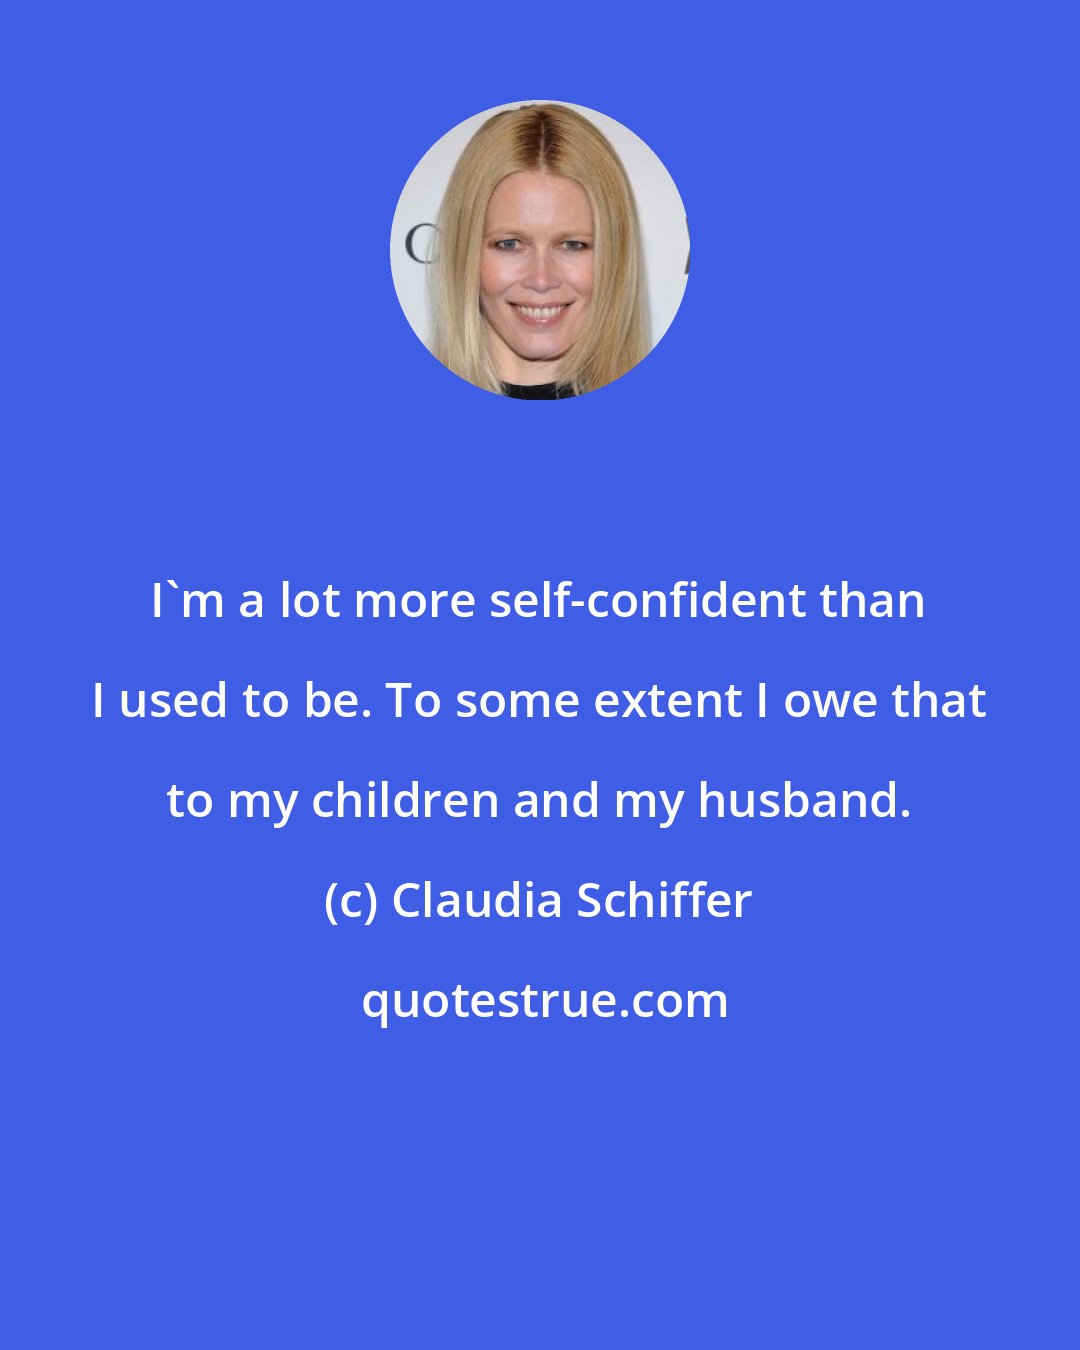 Claudia Schiffer: I'm a lot more self-confident than I used to be. To some extent I owe that to my children and my husband.